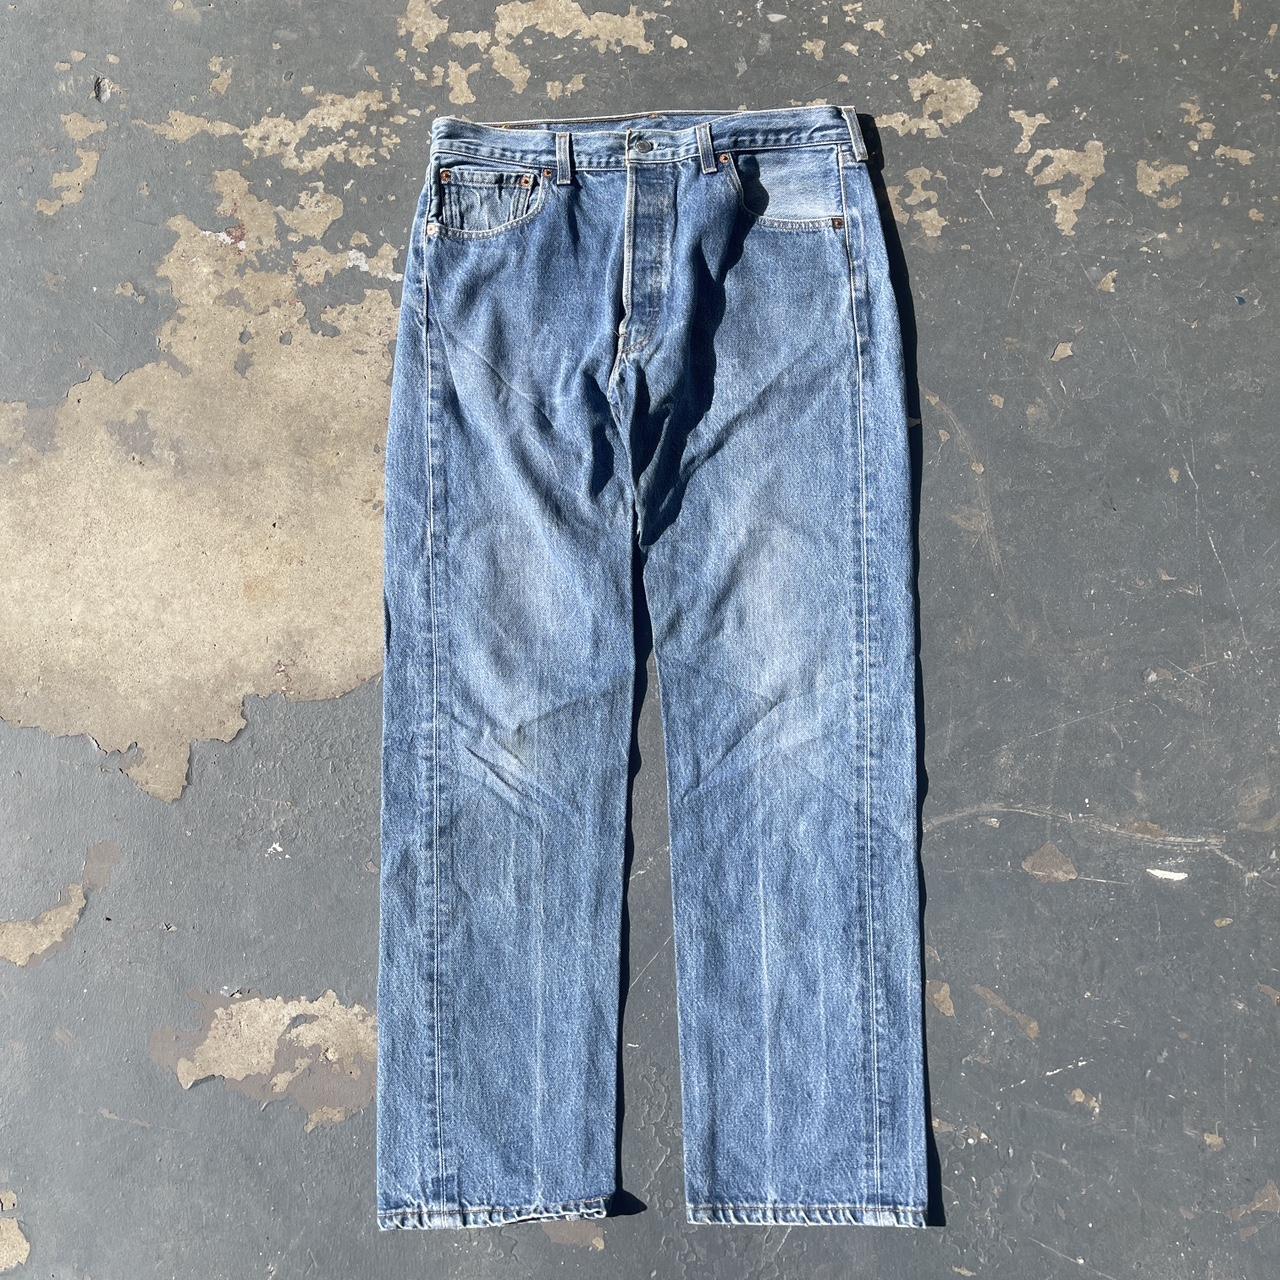 Levi's Men's Blue and White Jeans